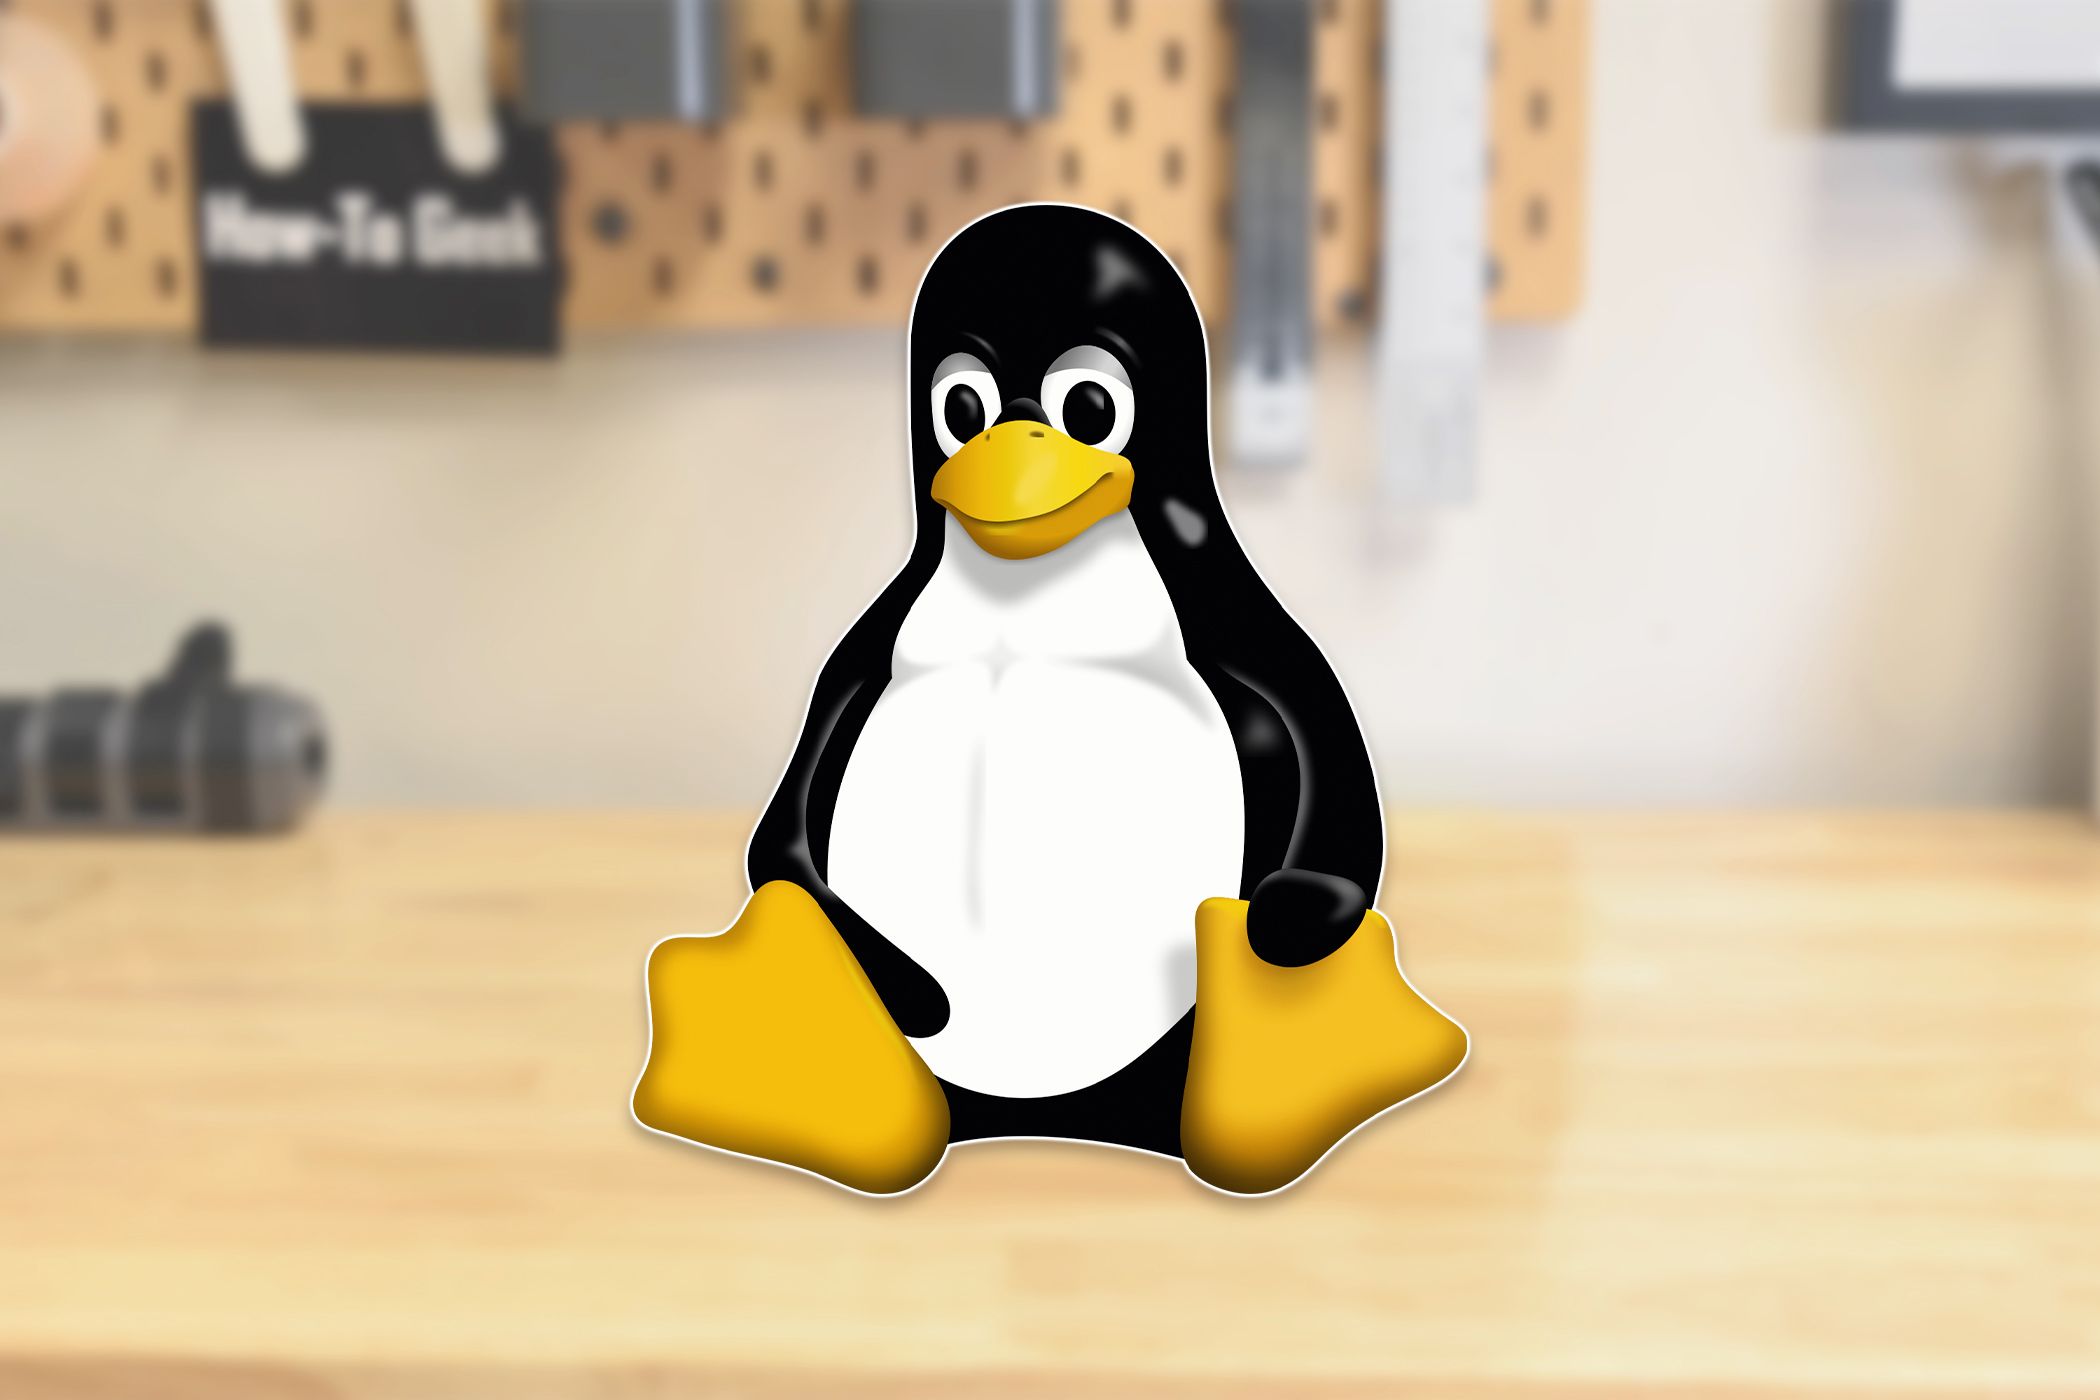 The Linux mascot, Tux, sitting on a workbench.